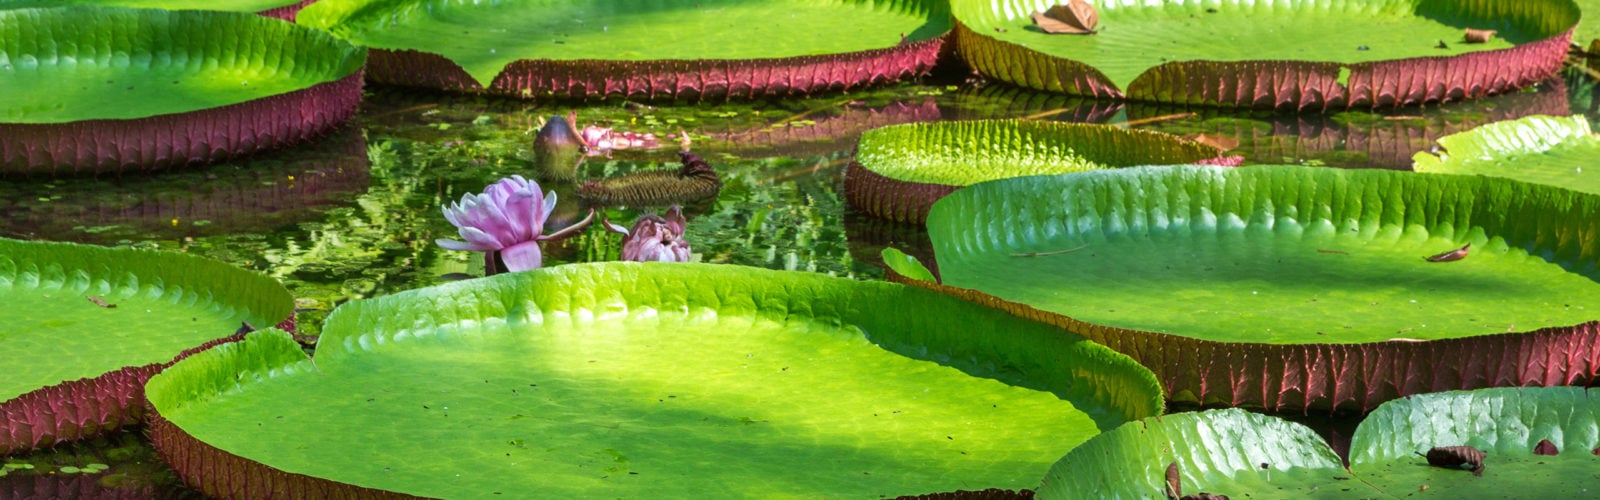 colombia-amazon-water-lily